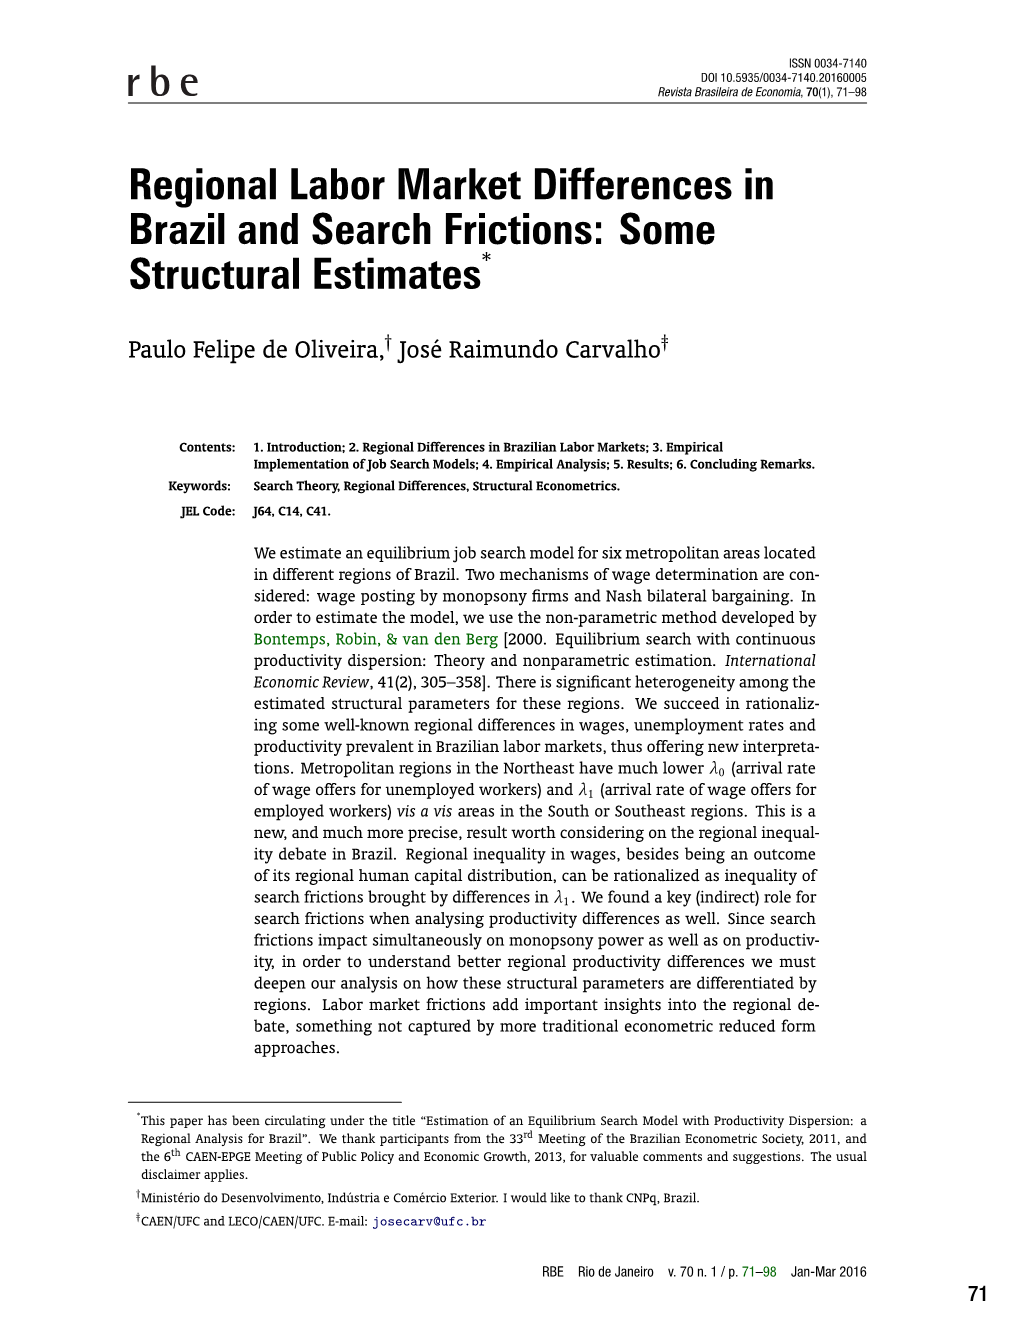 Regional Labor Market Differences in Brazil and Search Frictions: Some Structural Estimates*